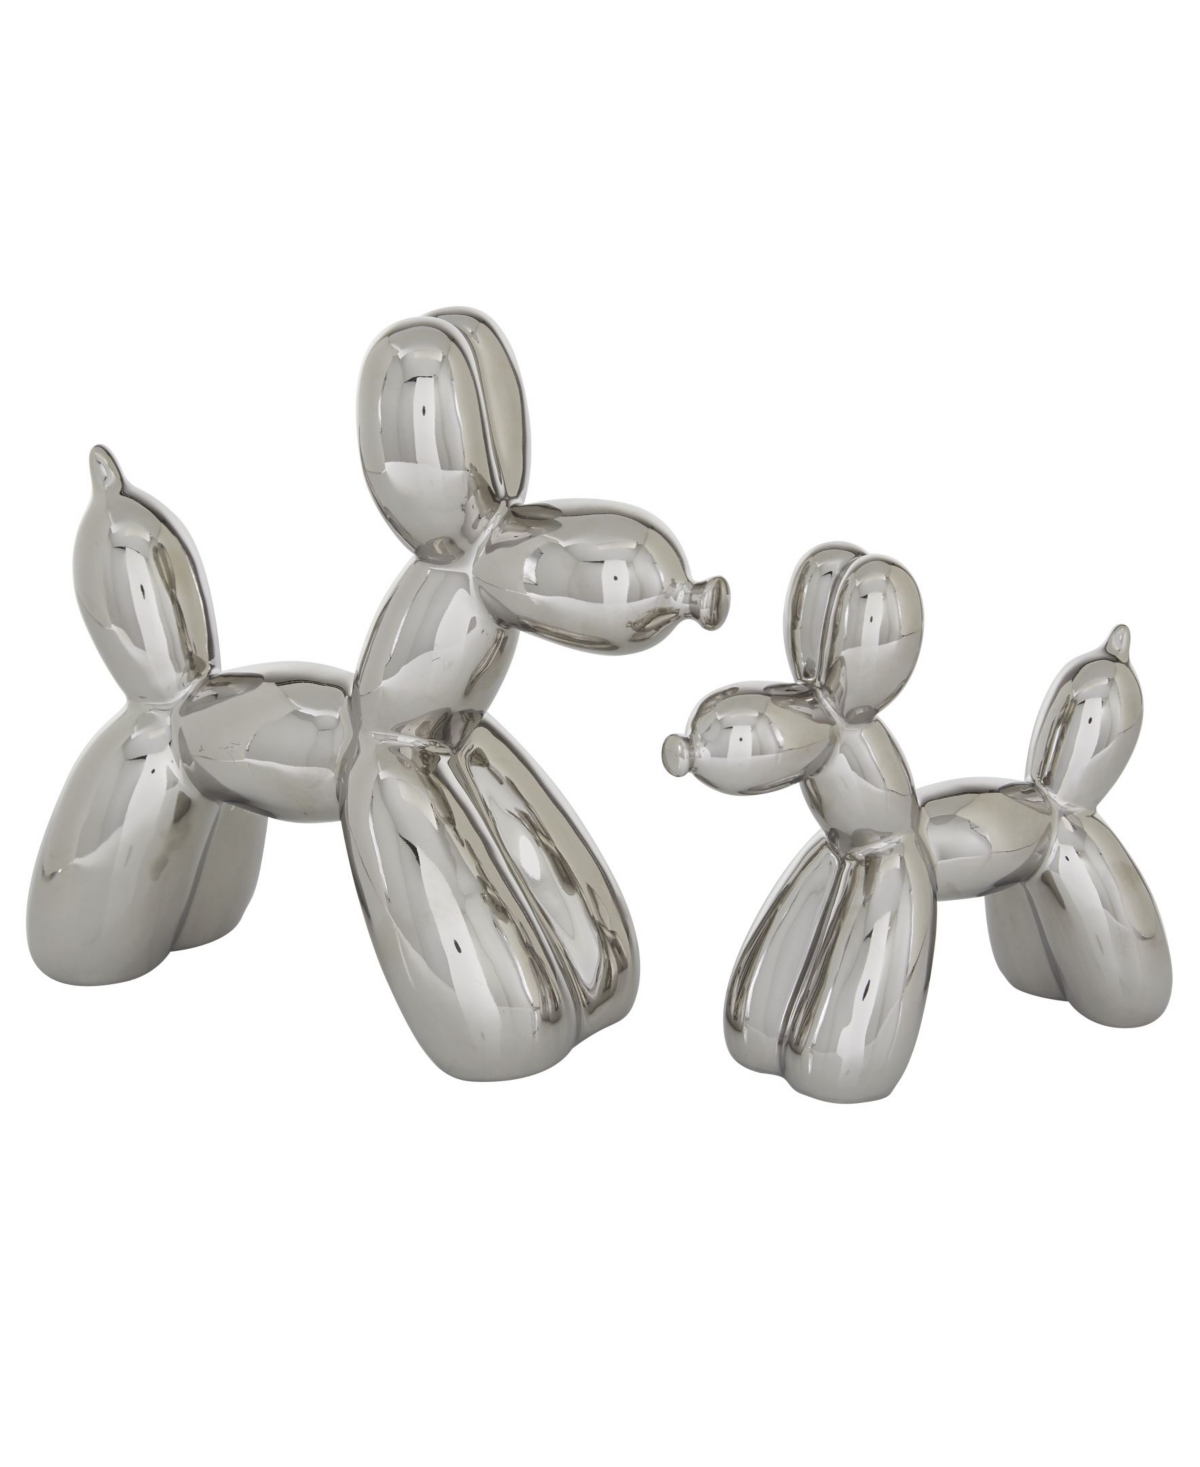 Rosemary Lane Contemporary Dog Sculpture, Set Of 2 In Silver-tone